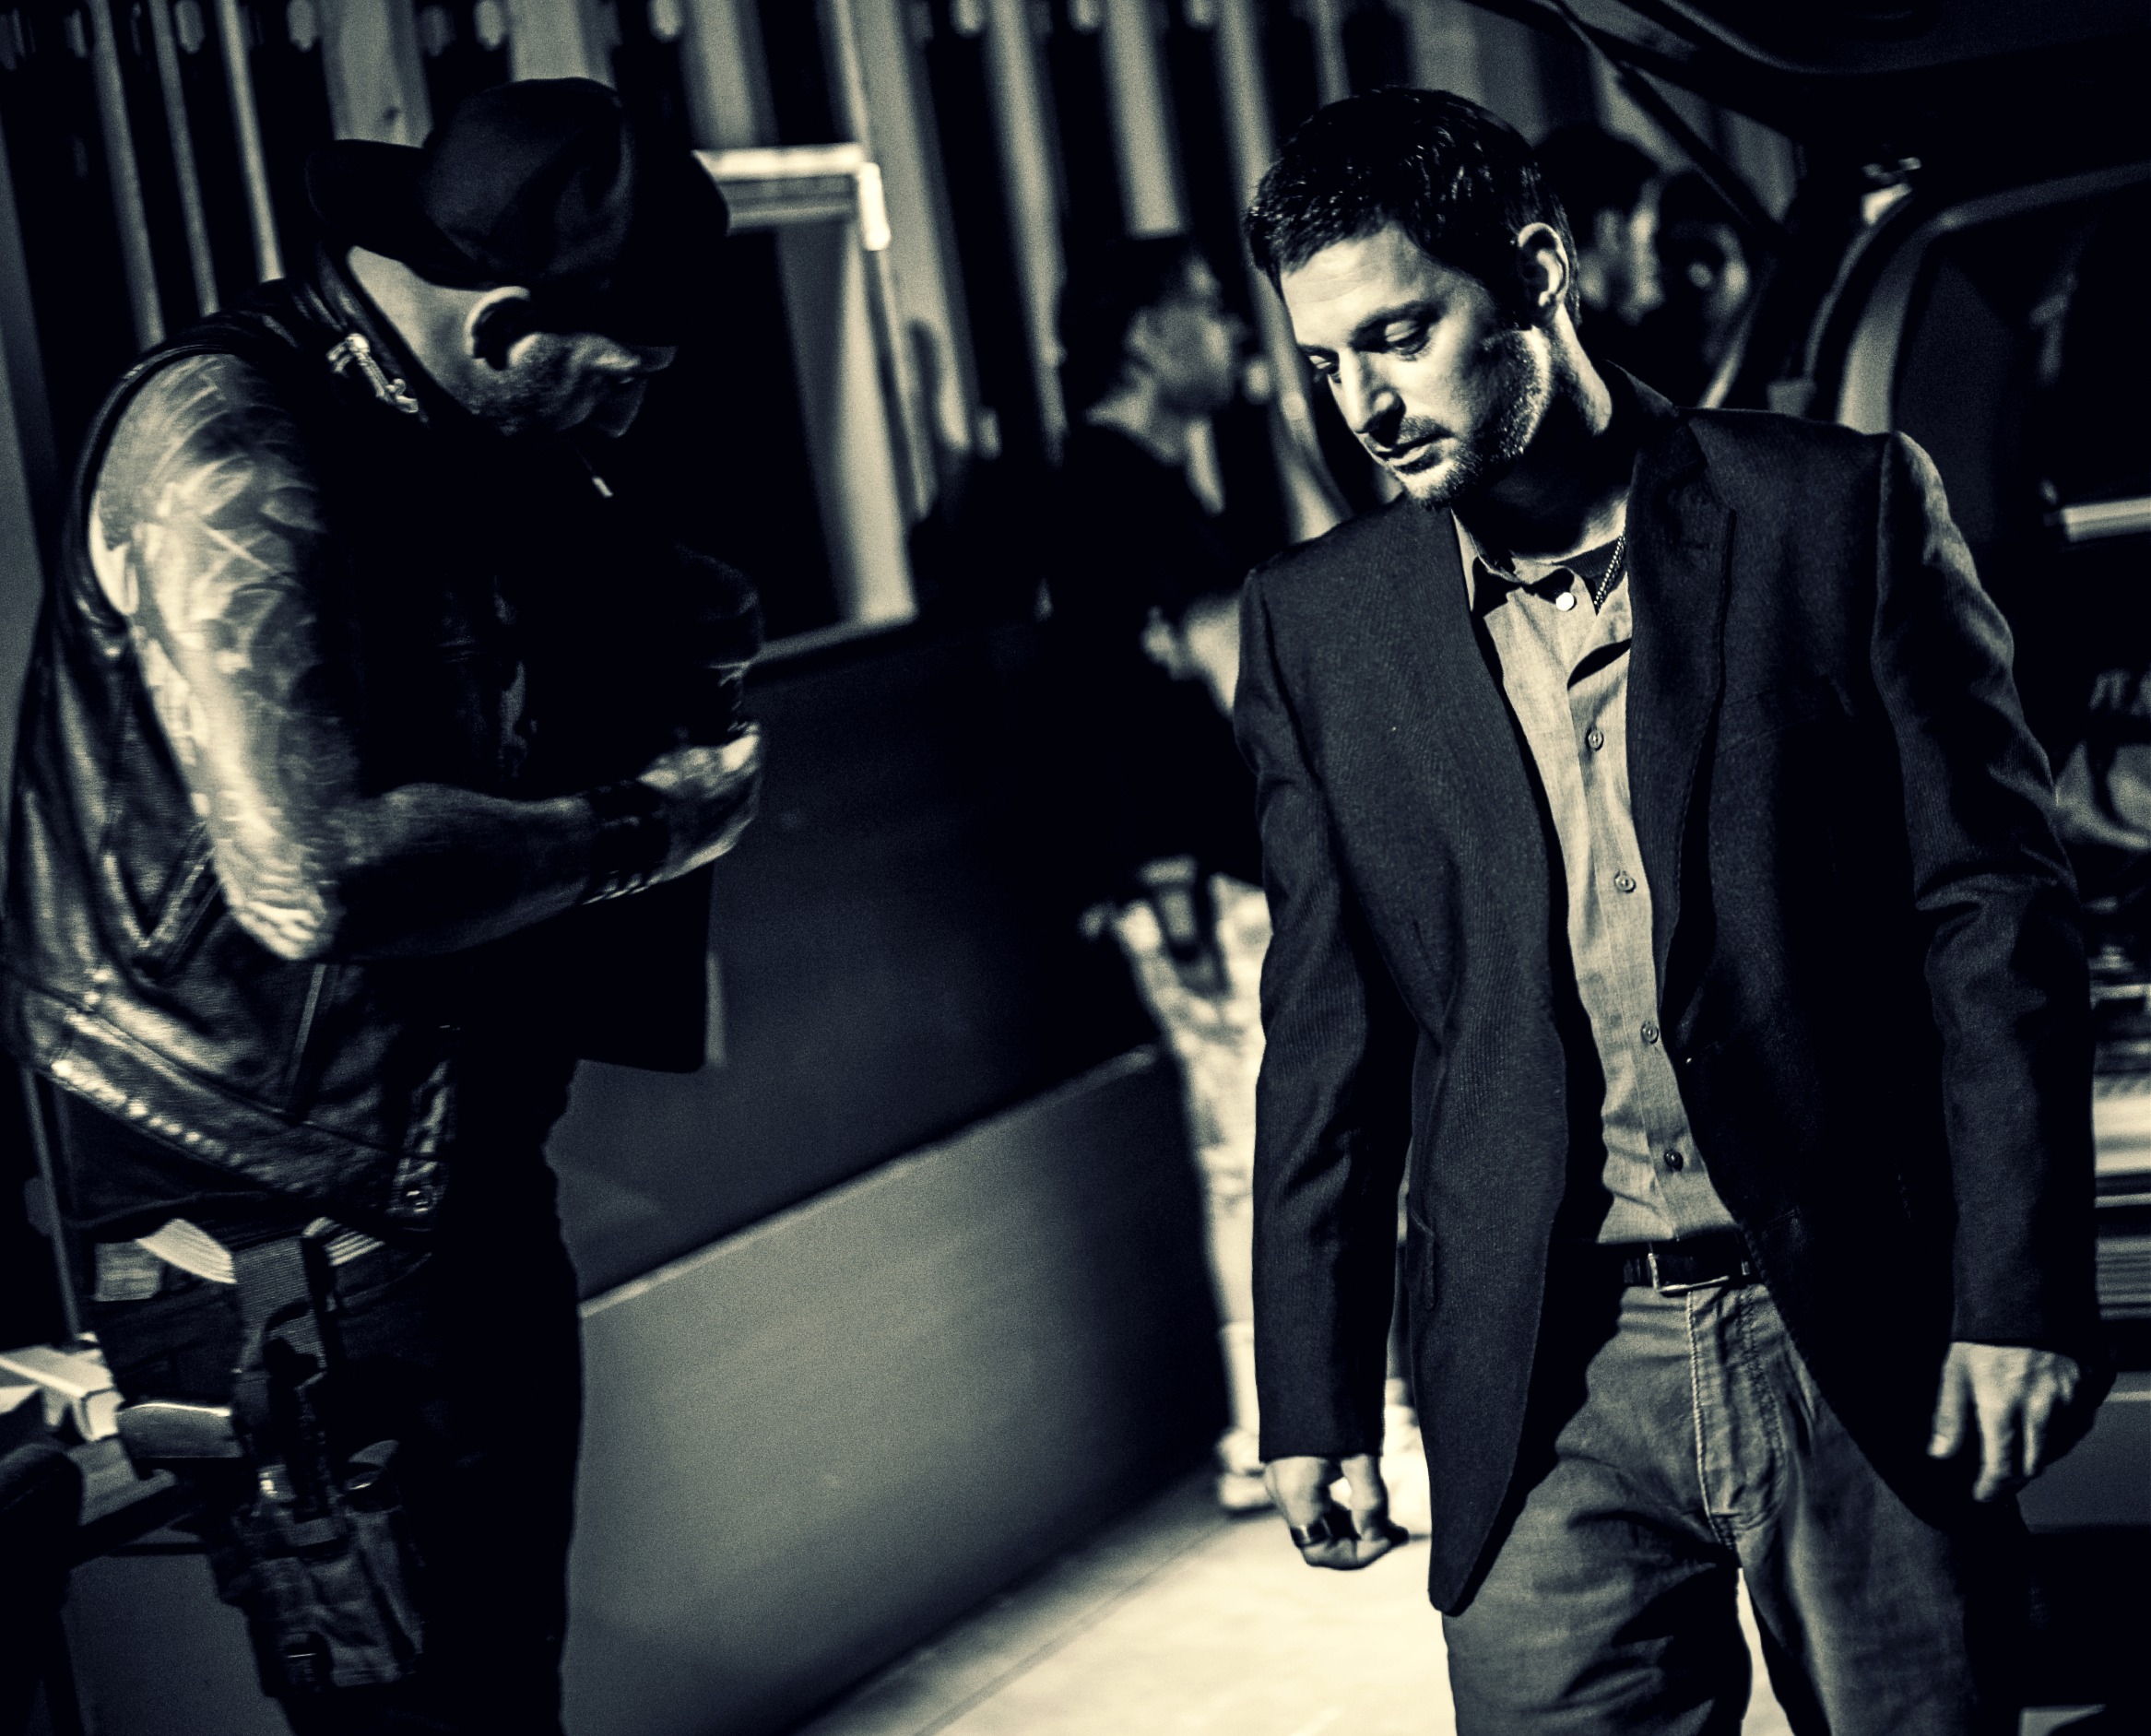 David Gere as 'Doc' in between takes with actor Nick Principe on the set of 